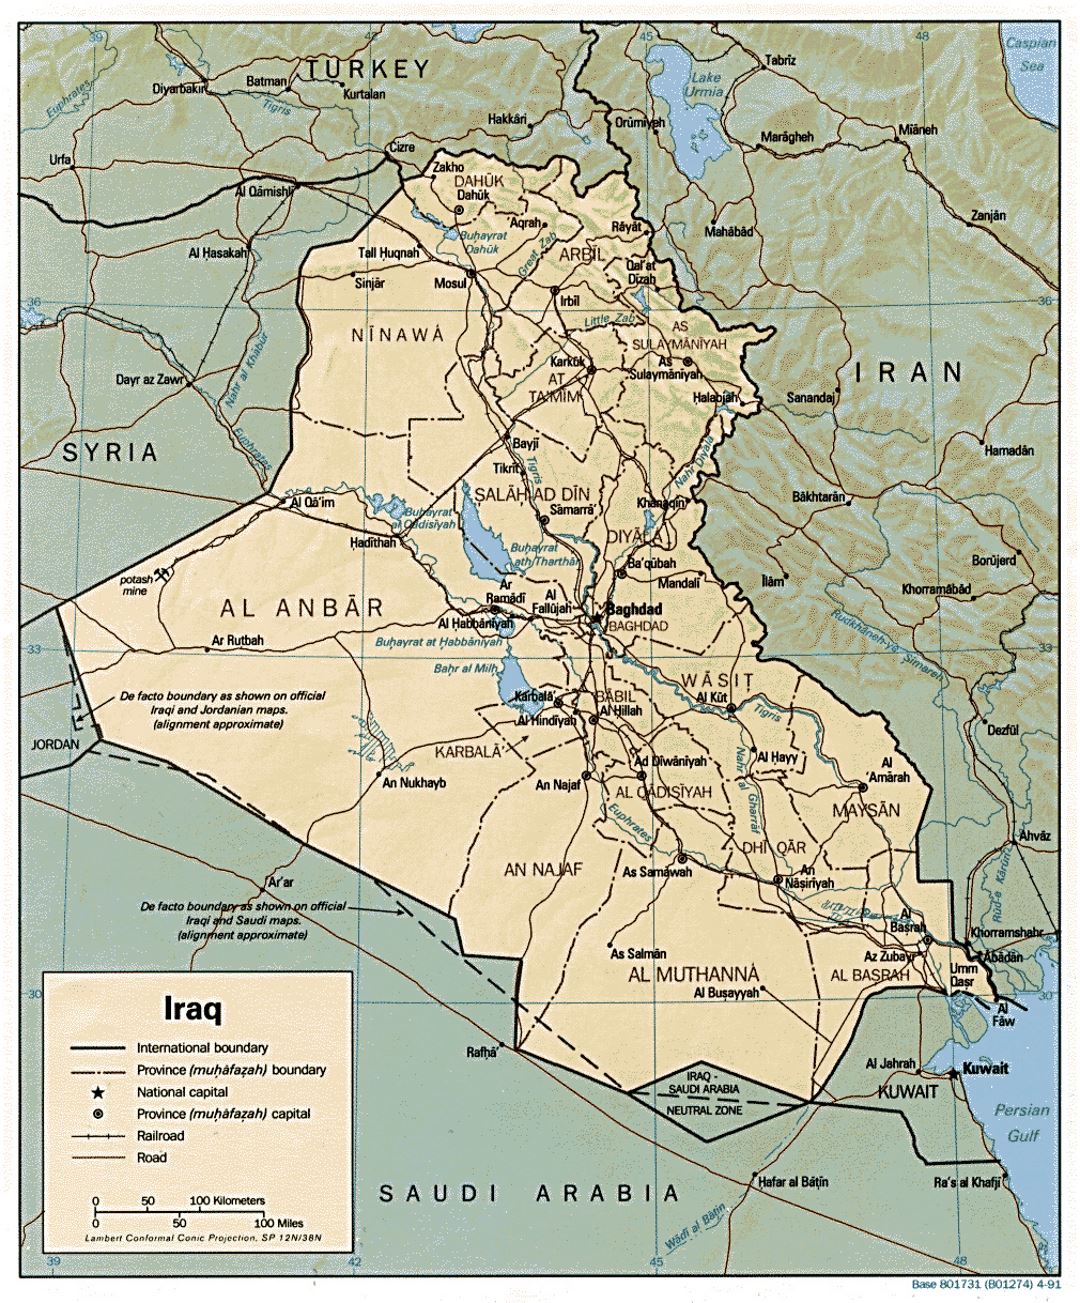 Detailed political and administrative map of Iraq with relief, roads, railroads and major cities - 1991